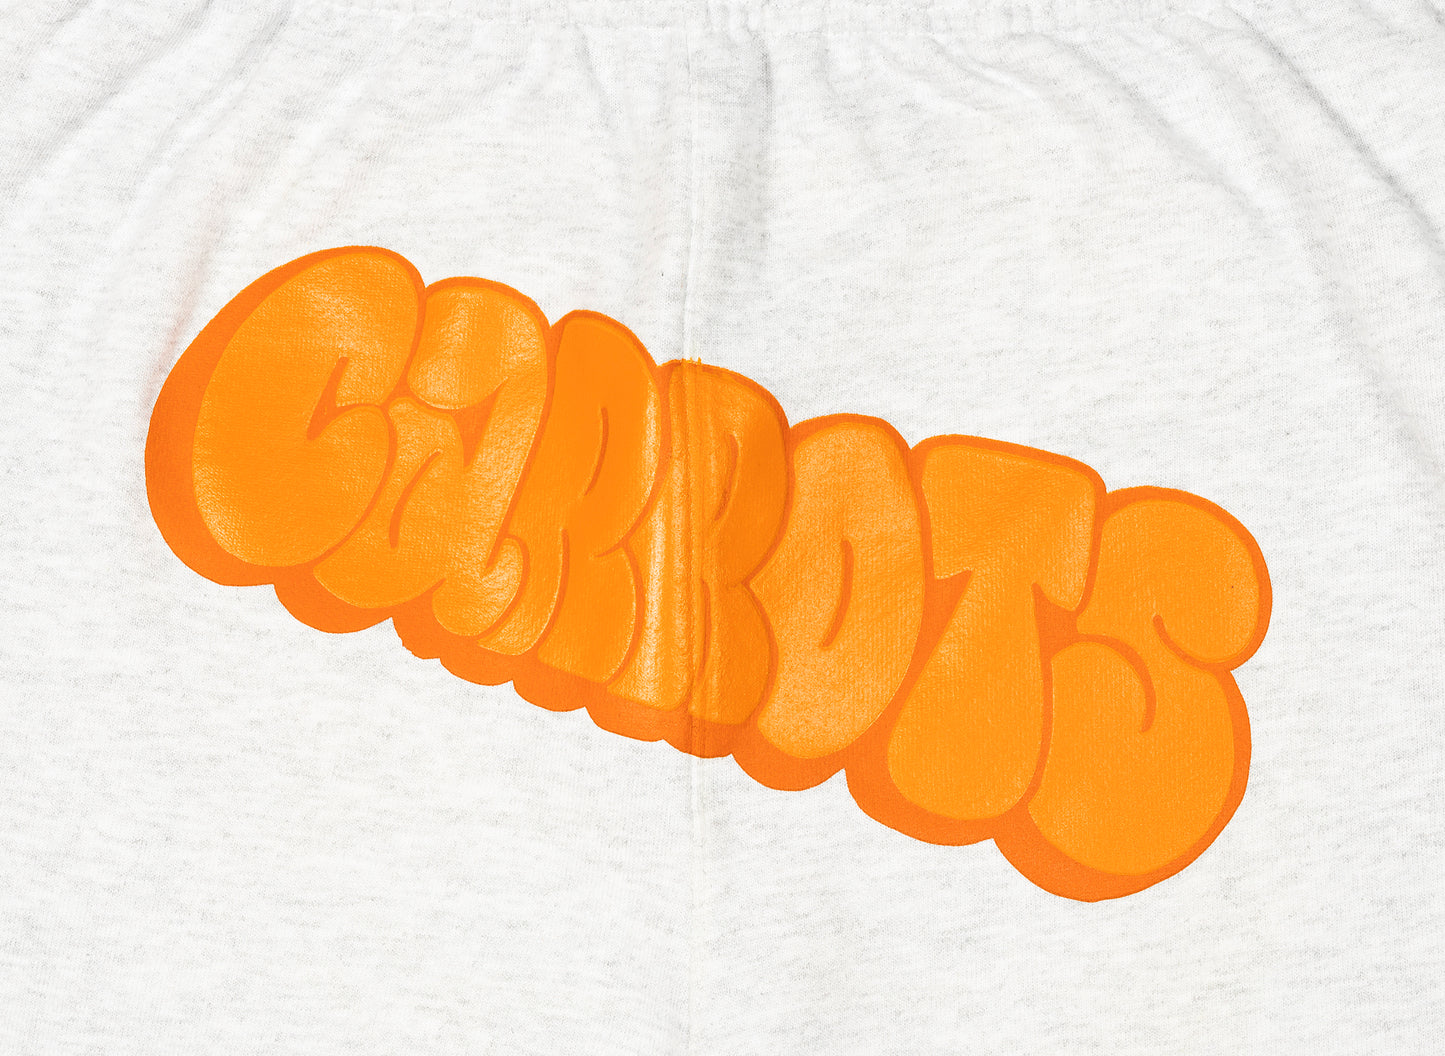 Carrots by Anwar Carrots Hit Up Champion Sweatpants in Heather Grey